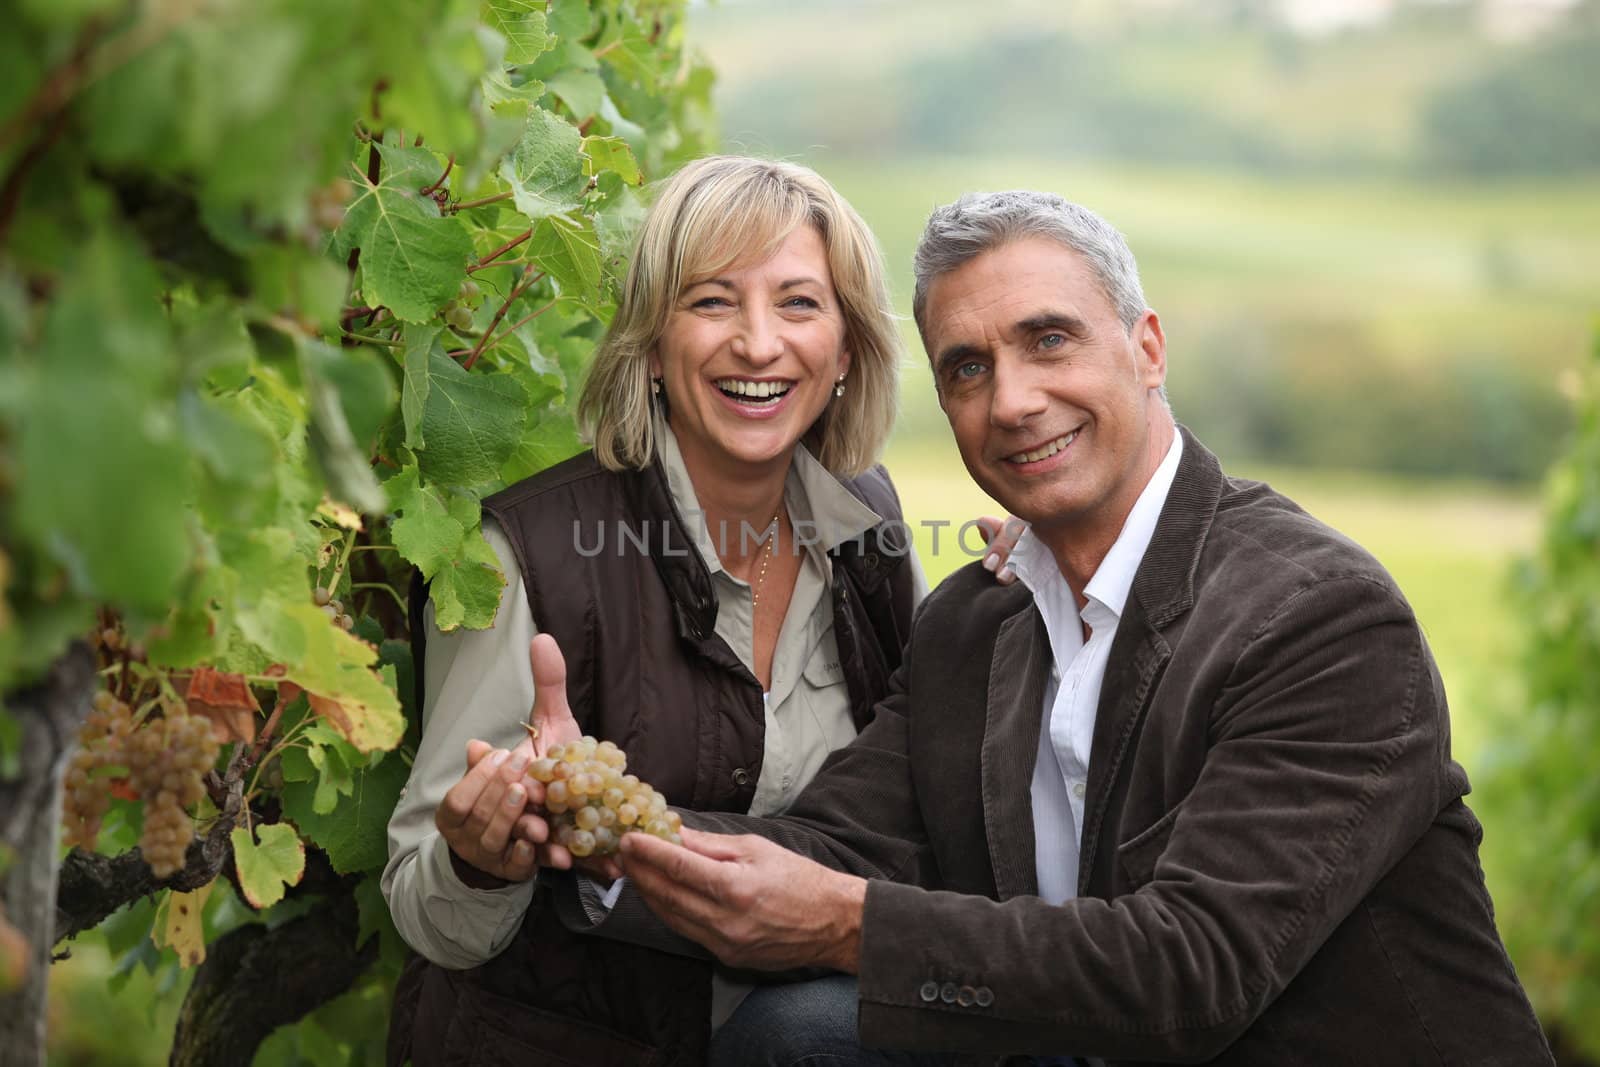 Vineyard owners holding a bunch of grapes by phovoir